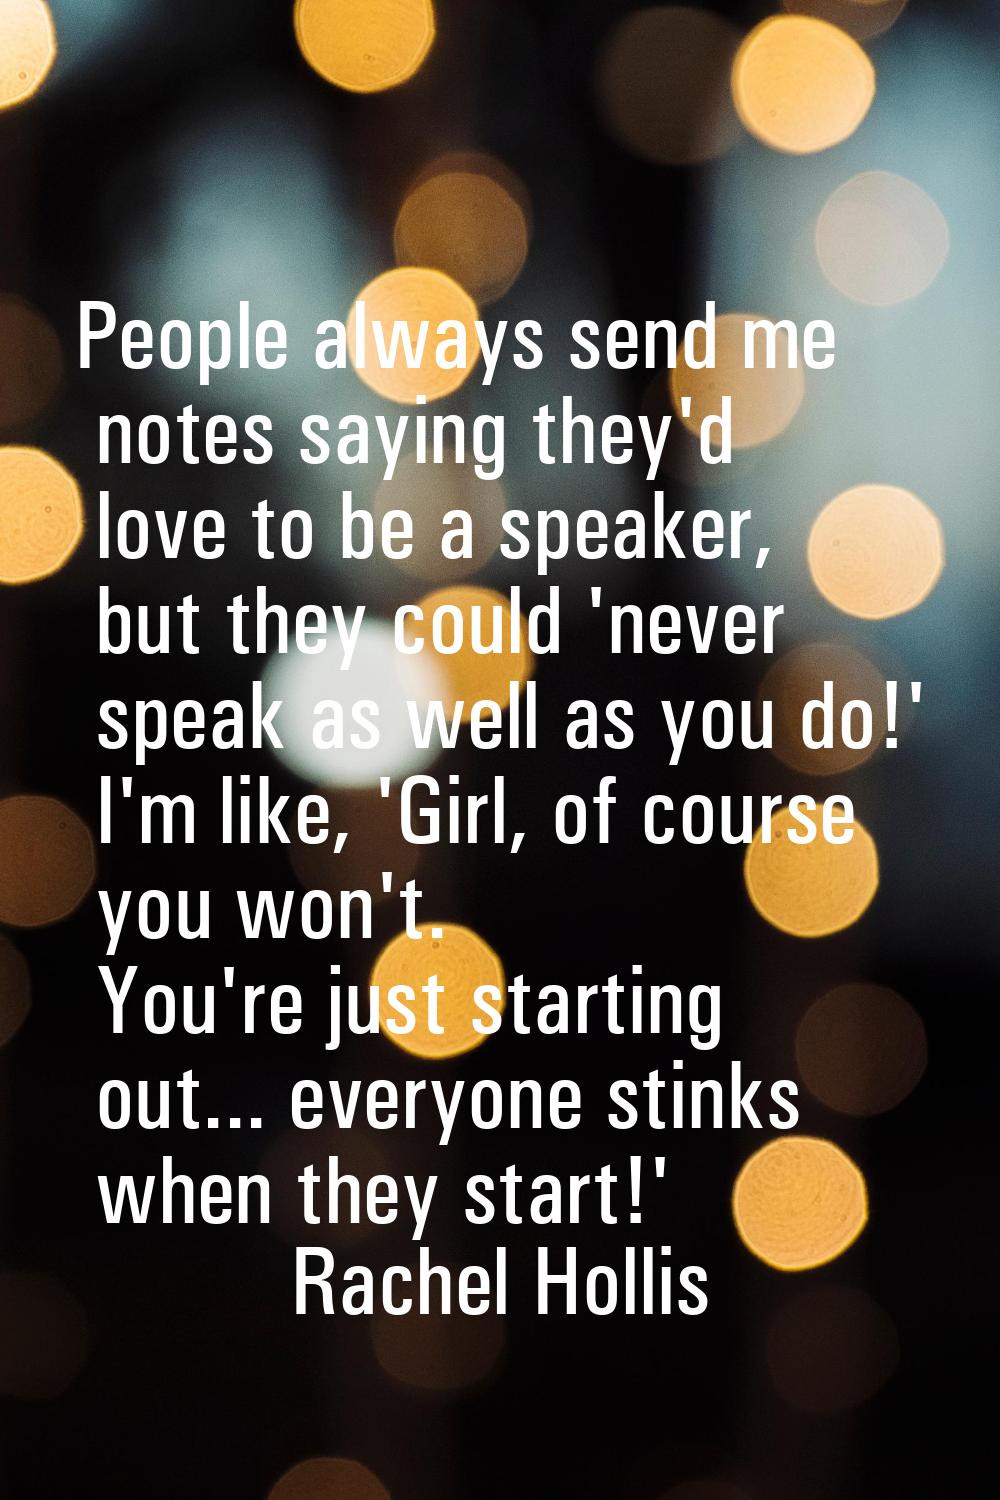 People always send me notes saying they'd love to be a speaker, but they could 'never speak as well